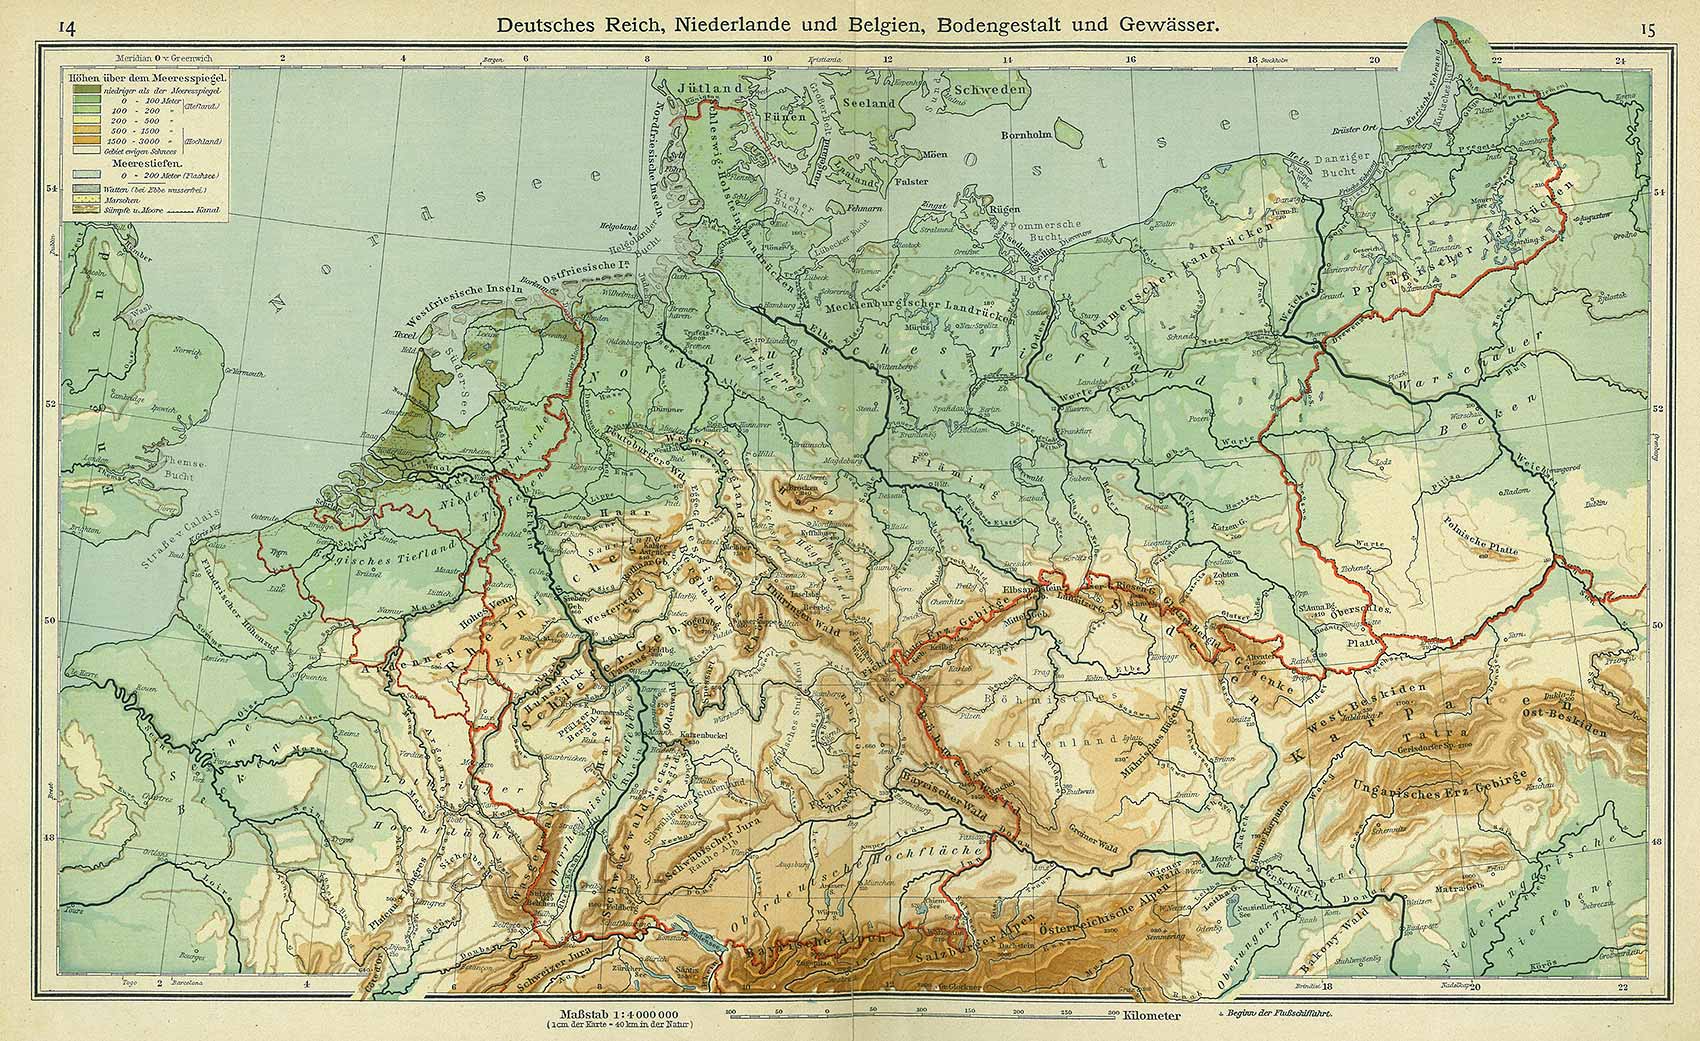 Germany, Netherlands, and Belgian topography and water zones, Andrees 'Berliner Schul-Atlas', 1916, pages 14 to 15, published size to print borders 42.8 cm wide by 26.41 cm high.